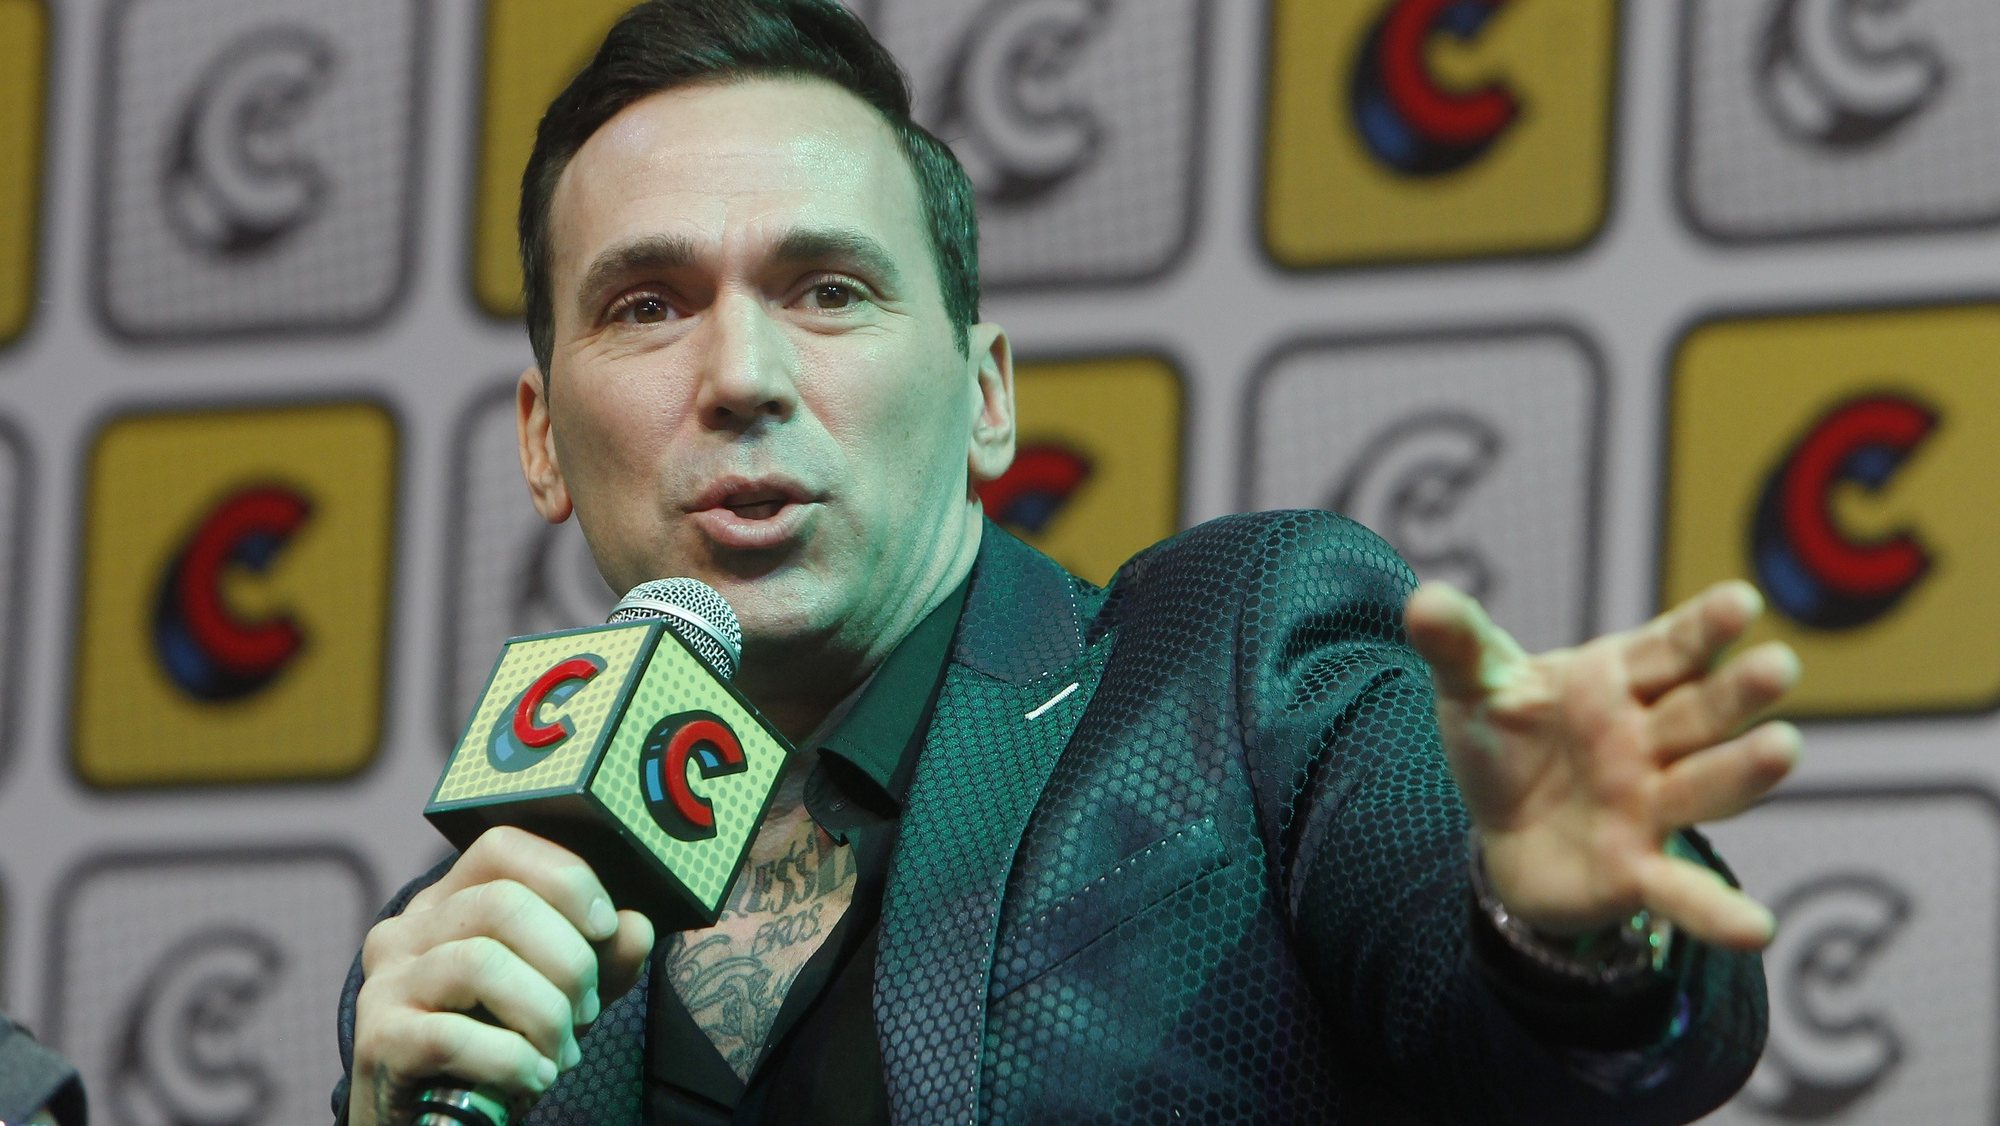 epa07174197 US actor Jason David Frank speaks in a forum during the second day of the Comic Con in Medellin, Colombia, 17 November 2018. Frank is known as &#039;Tommy Oliver&#039;, the Green Ranger in the series Power Rangers.  EPA/LUIS EDUARDO NORIEGA A.